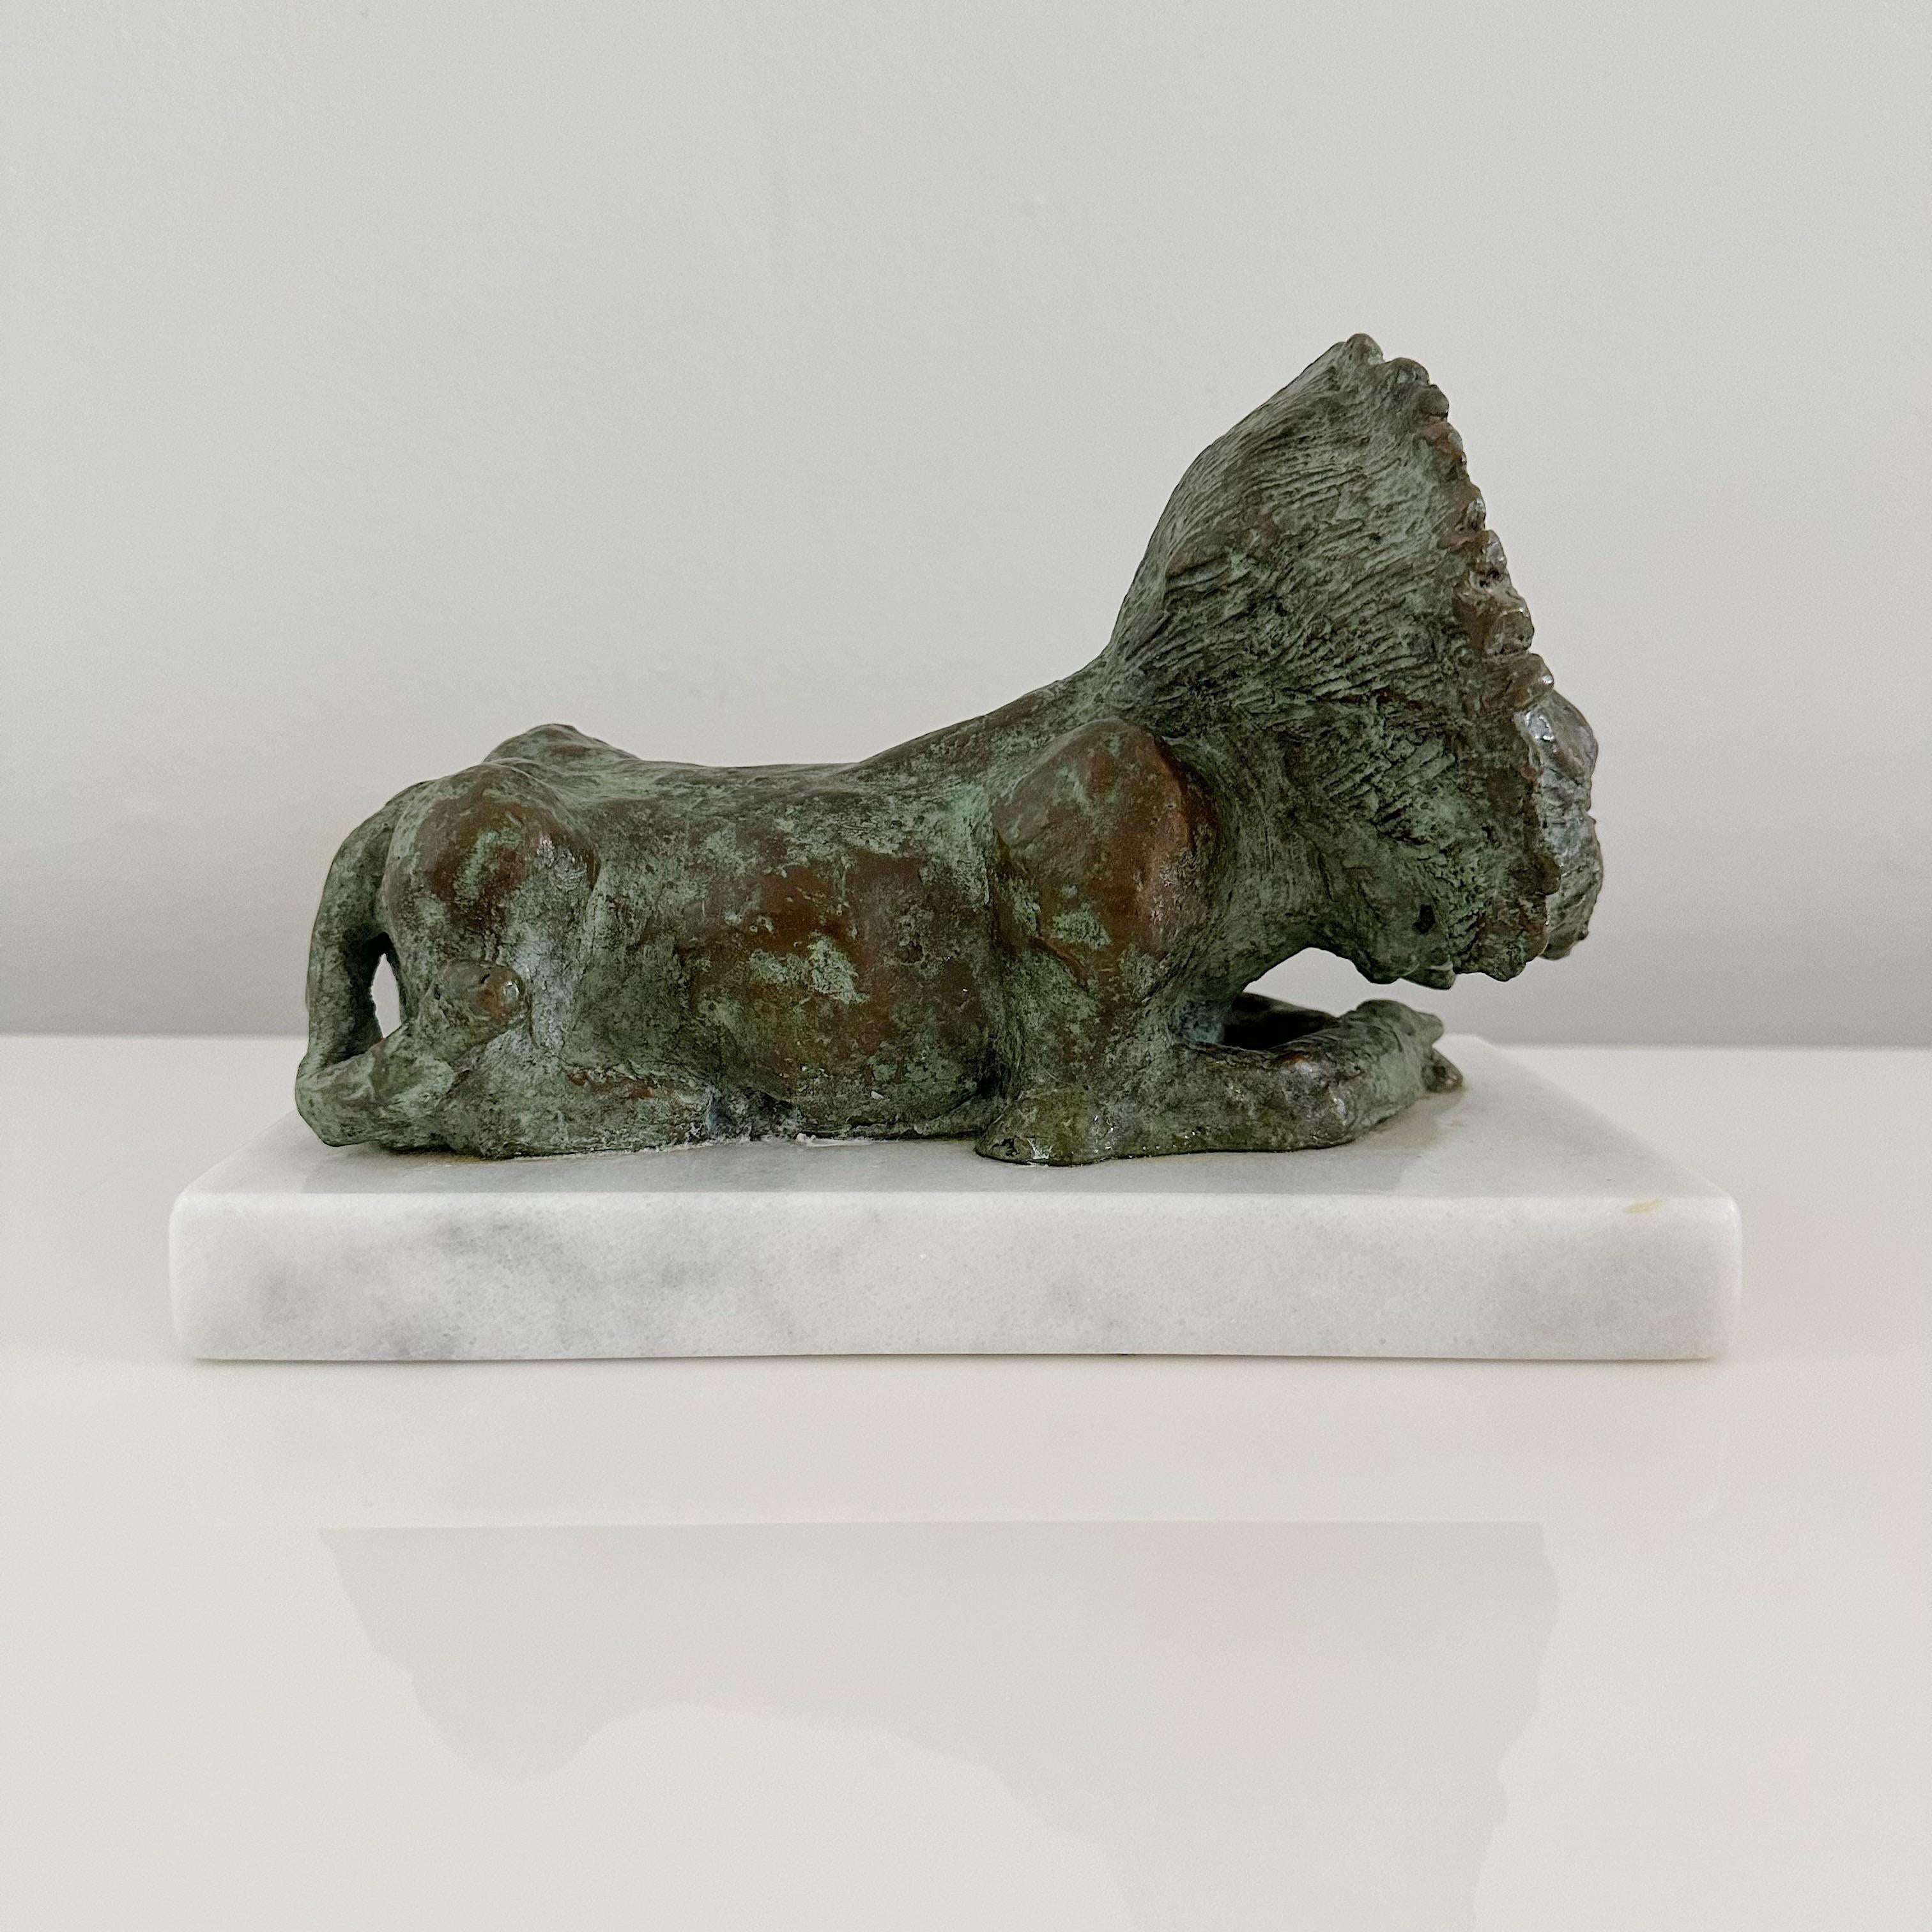 Mid 20th century brutalist bronze reclining lion on white Carrera marble base. Glue marks can be seen where lion is attached to the marble base. Signed, illegible signature. This bronze shows a loverly warm patina.